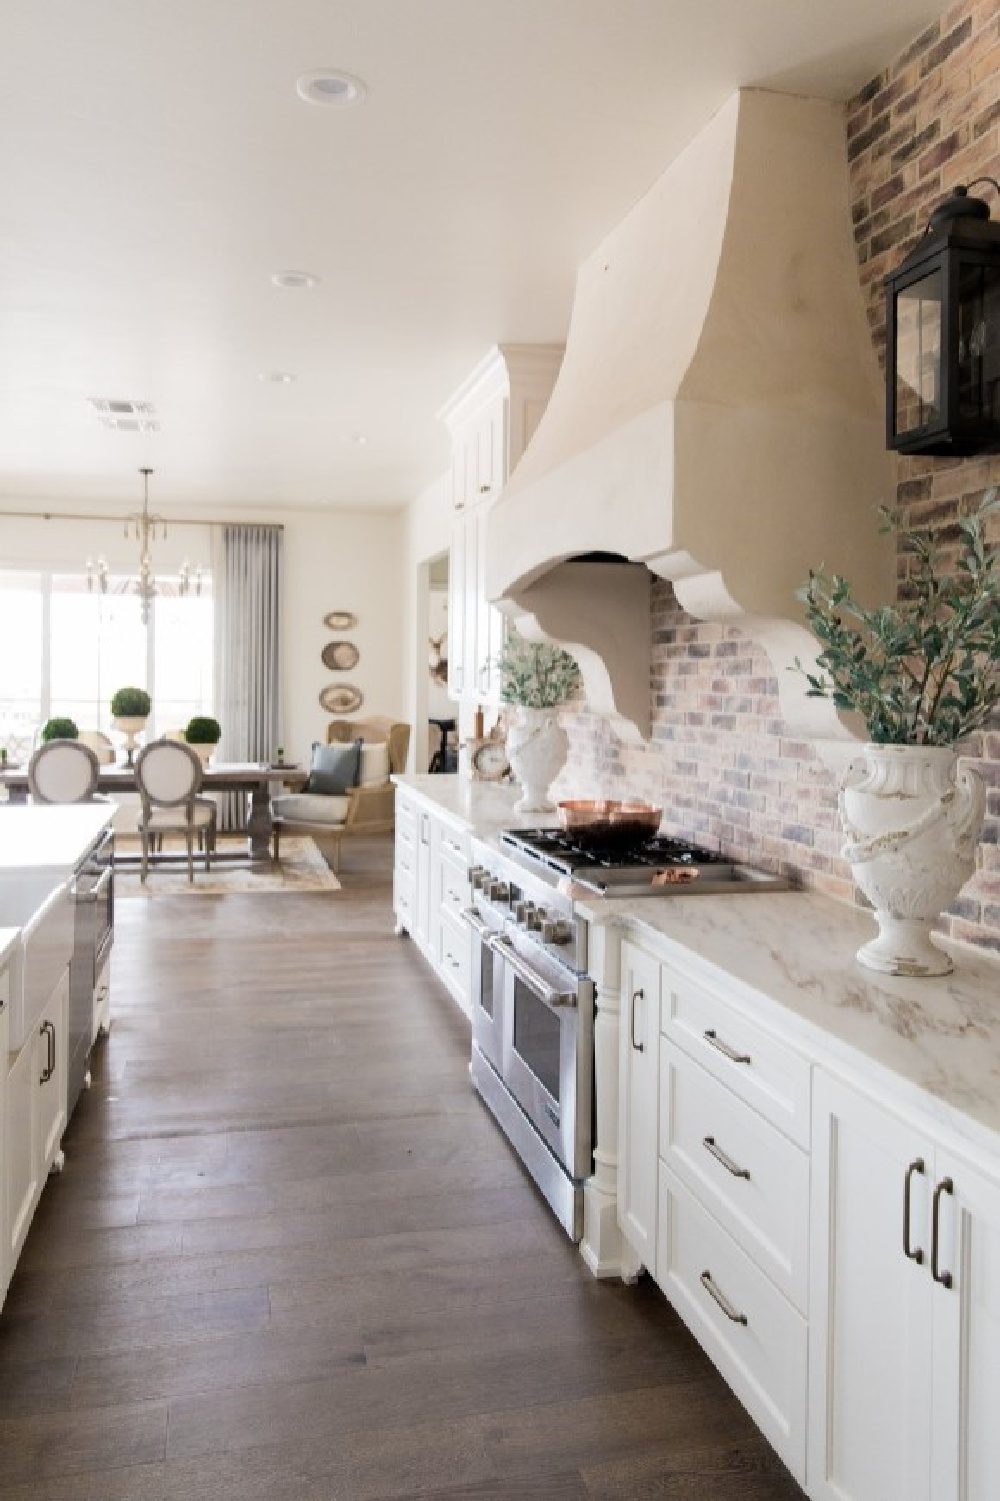 Sherwin-Williams Alabaster in a beautiful country French kitchen with Old World style and Chicago brick backsplash - design by Brit Jones. #swalabaster #modernfrench